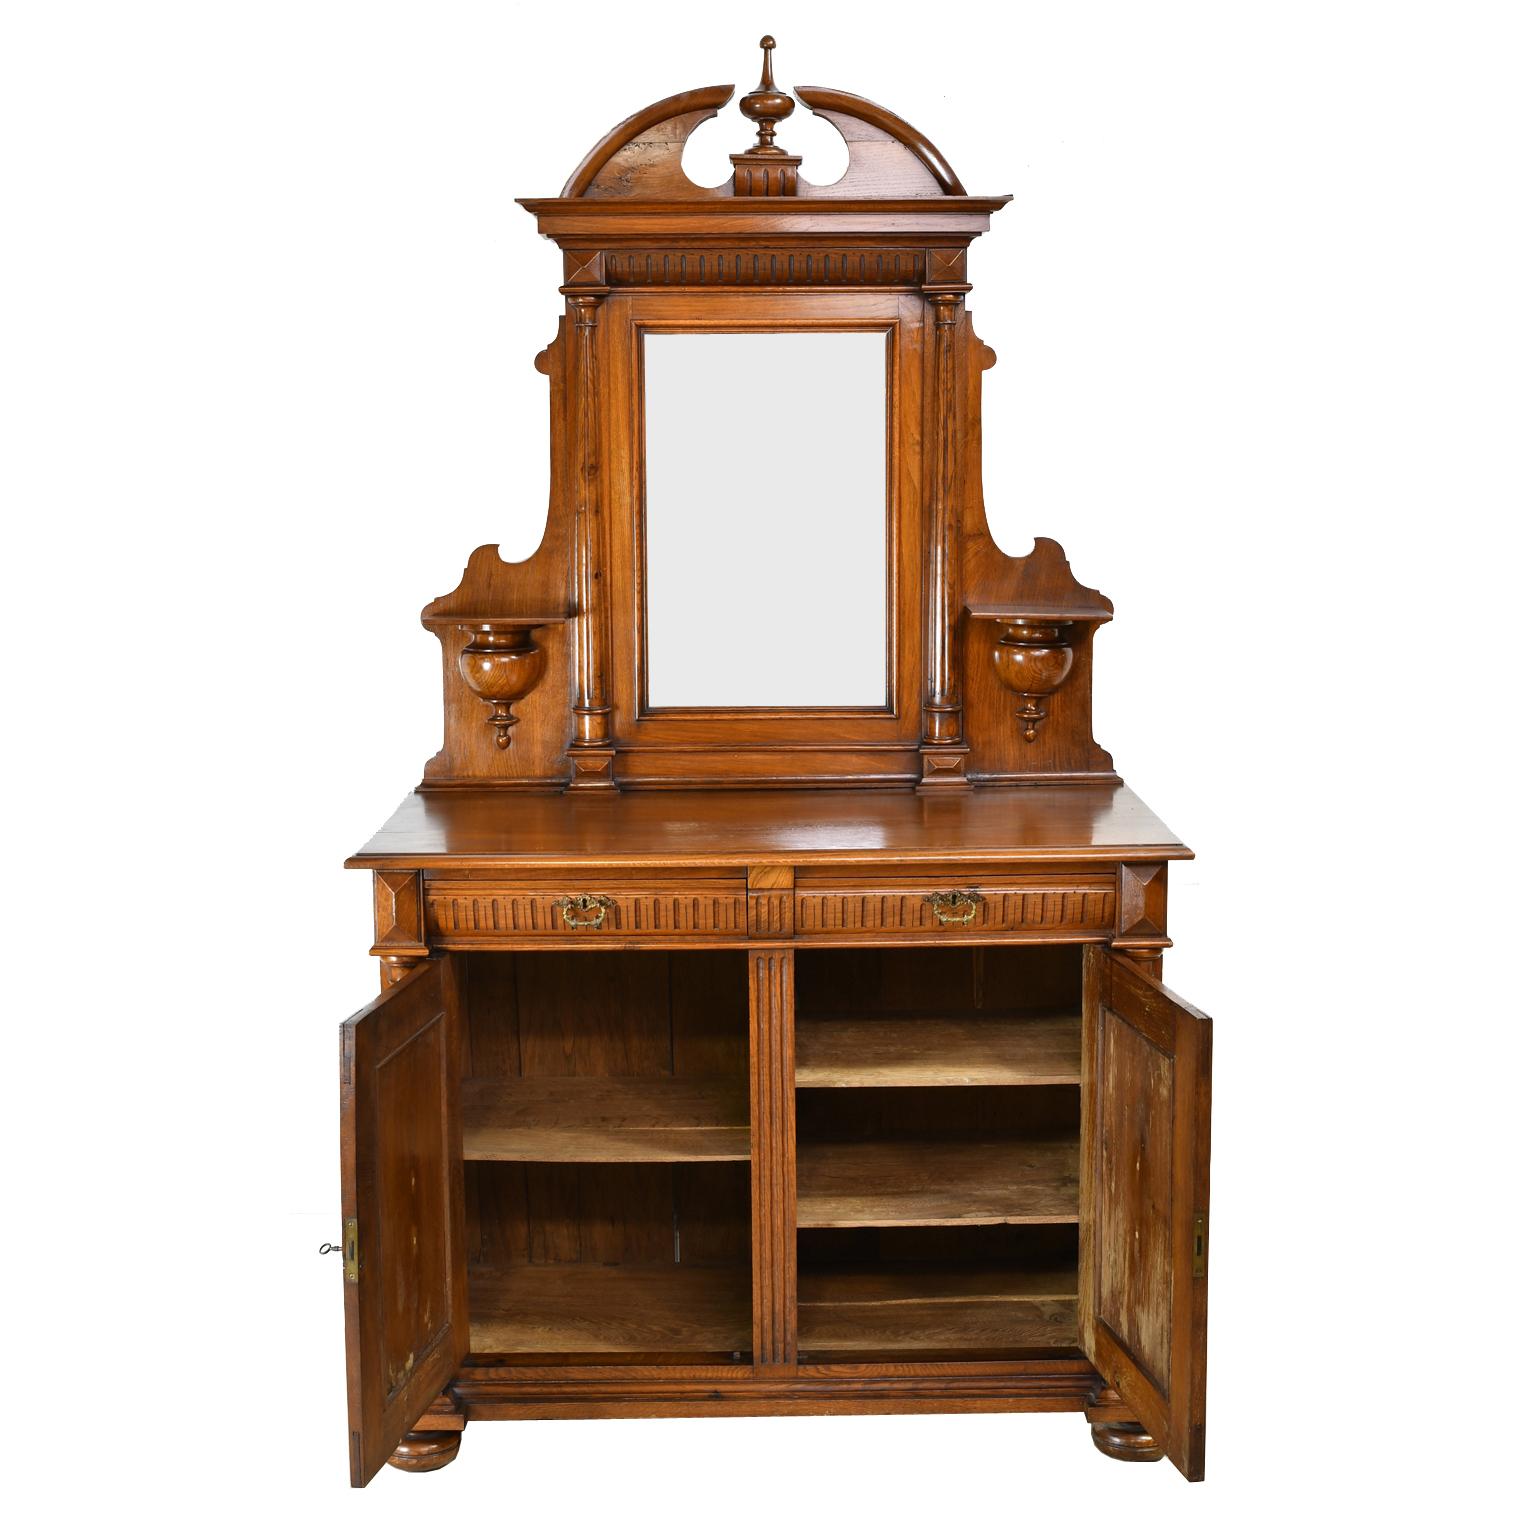 A lovely buffet in oak with a mirrored top over a cabinet with two drawers and two doors. Mirror frame has a split-pediment top with turned center finial and is flanked by fluted columns, with sconces for candles. The cabinet has convex fluted